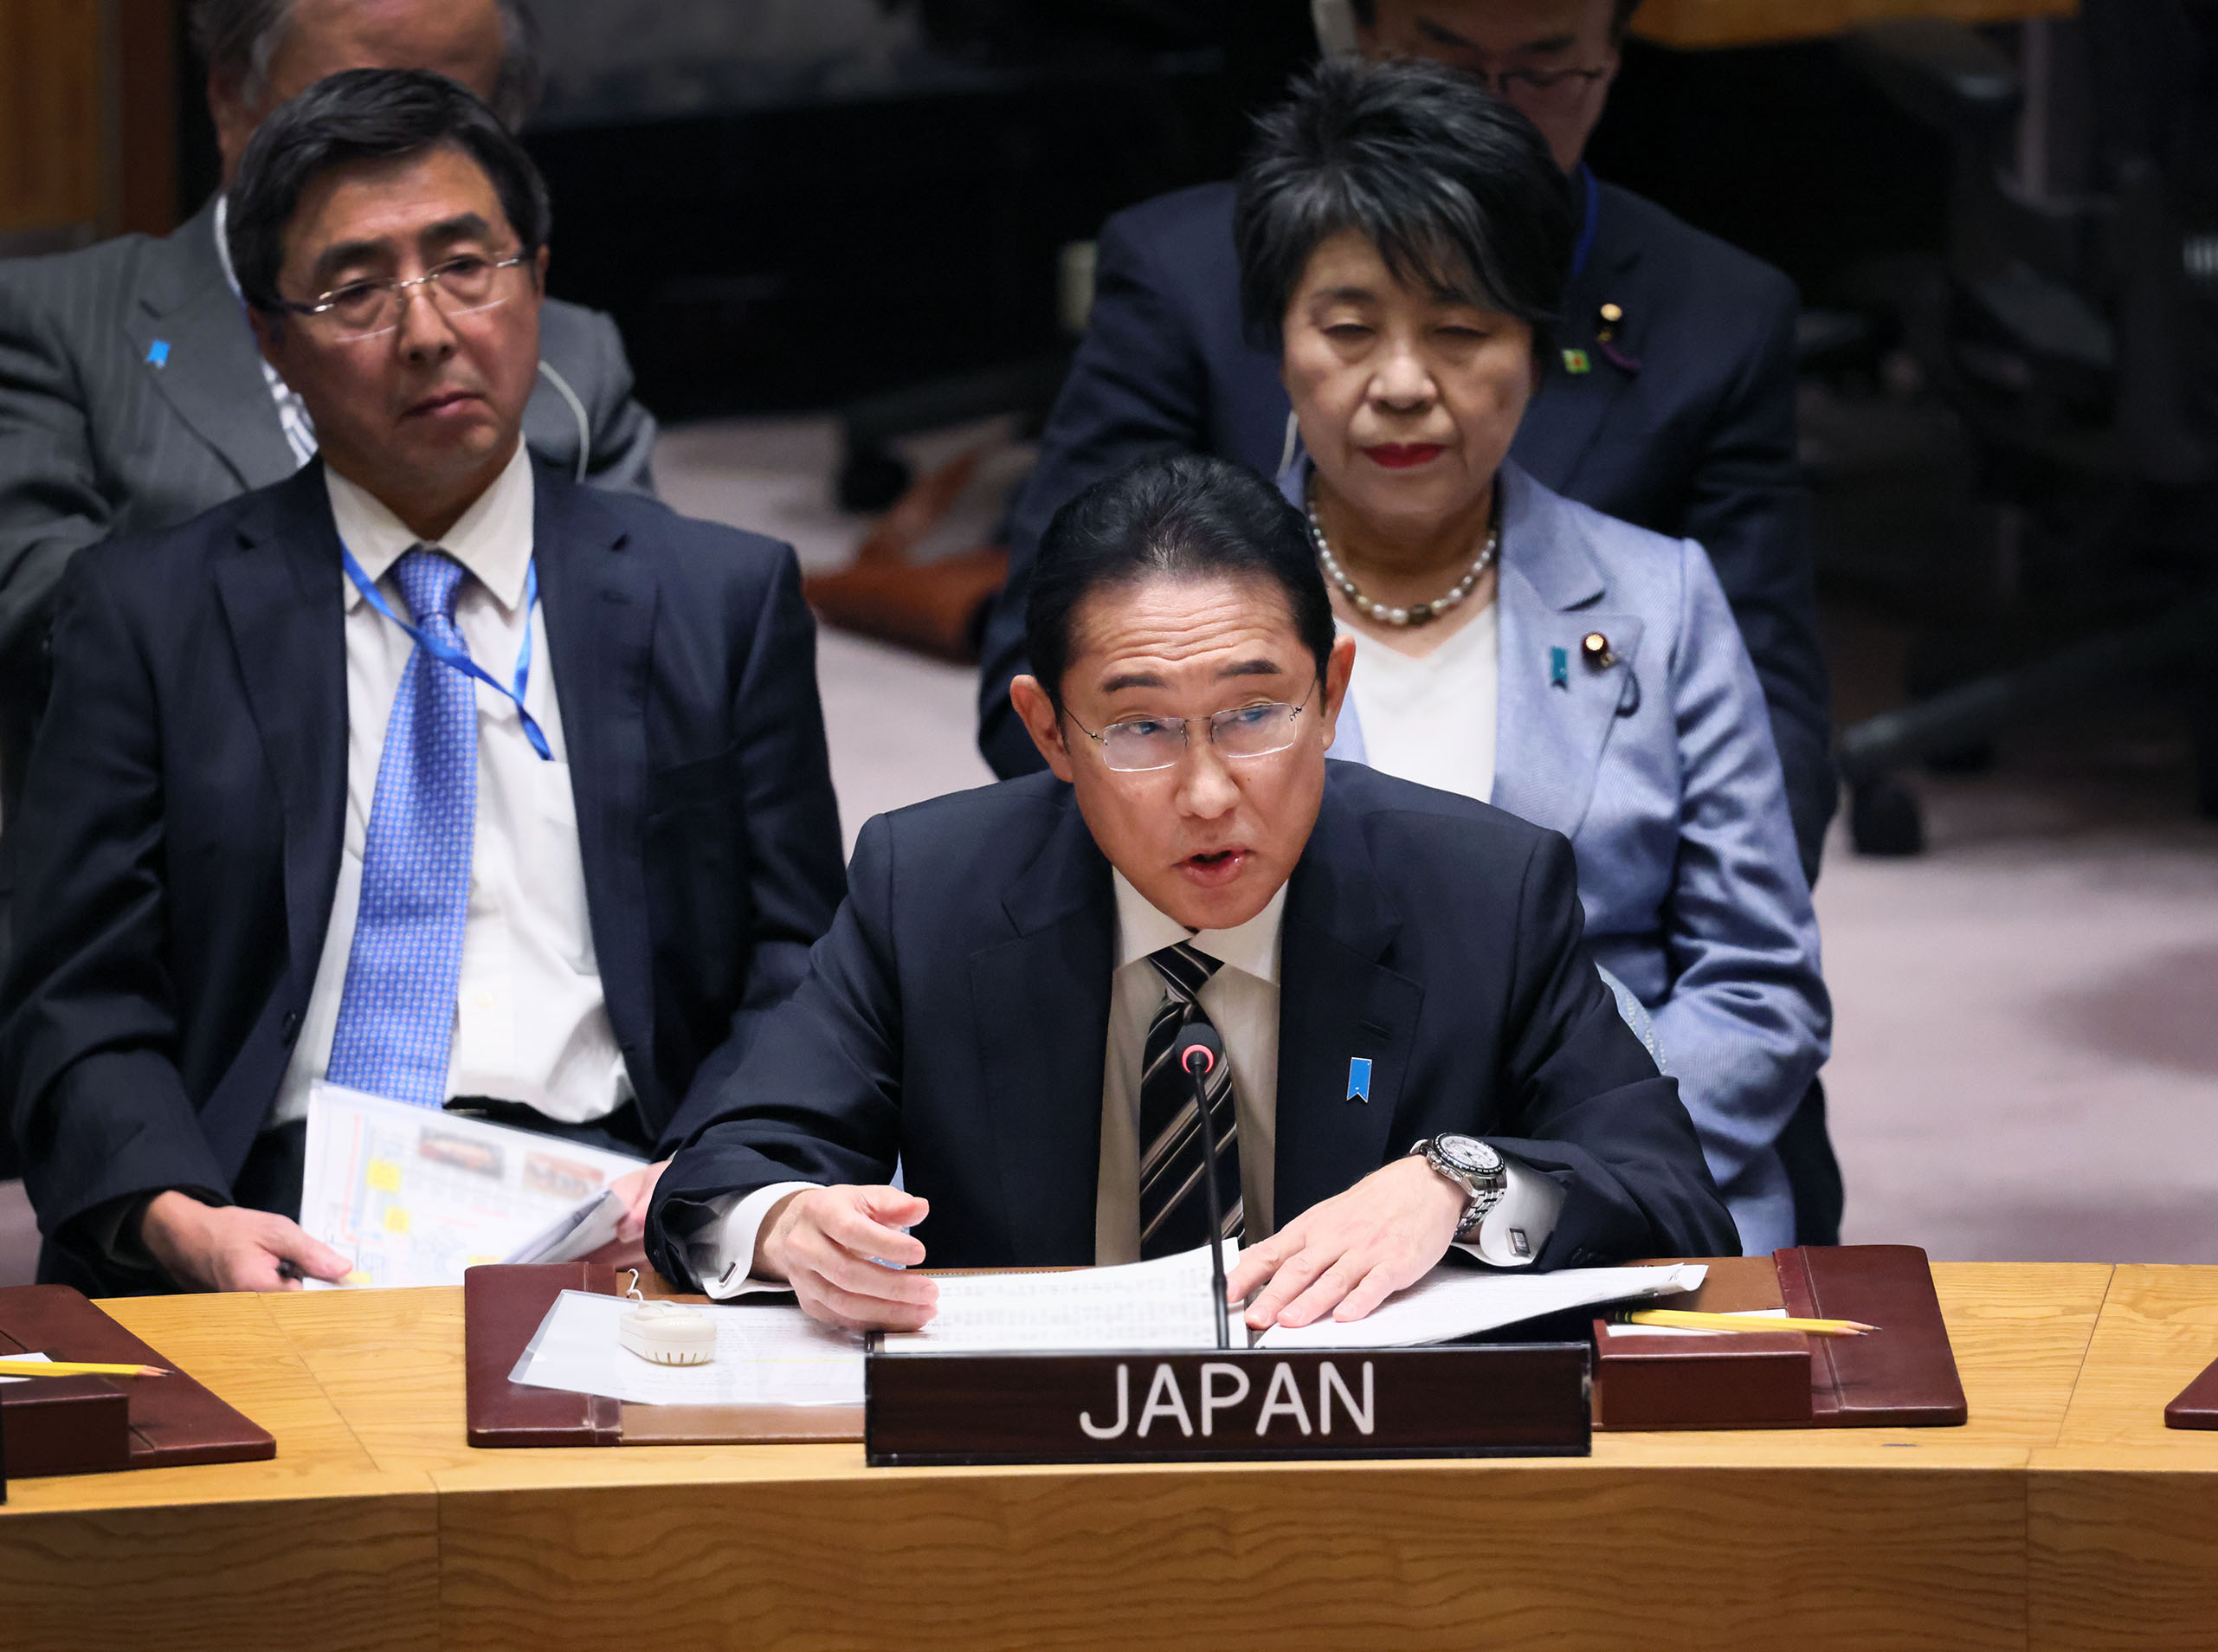 Prime Minister Kishida attending the Security Council High Level Open Debate on “Upholding the purposes and principles of the UN Charter through effective multilateralism: maintenance of peace and security of Ukraine” (3)